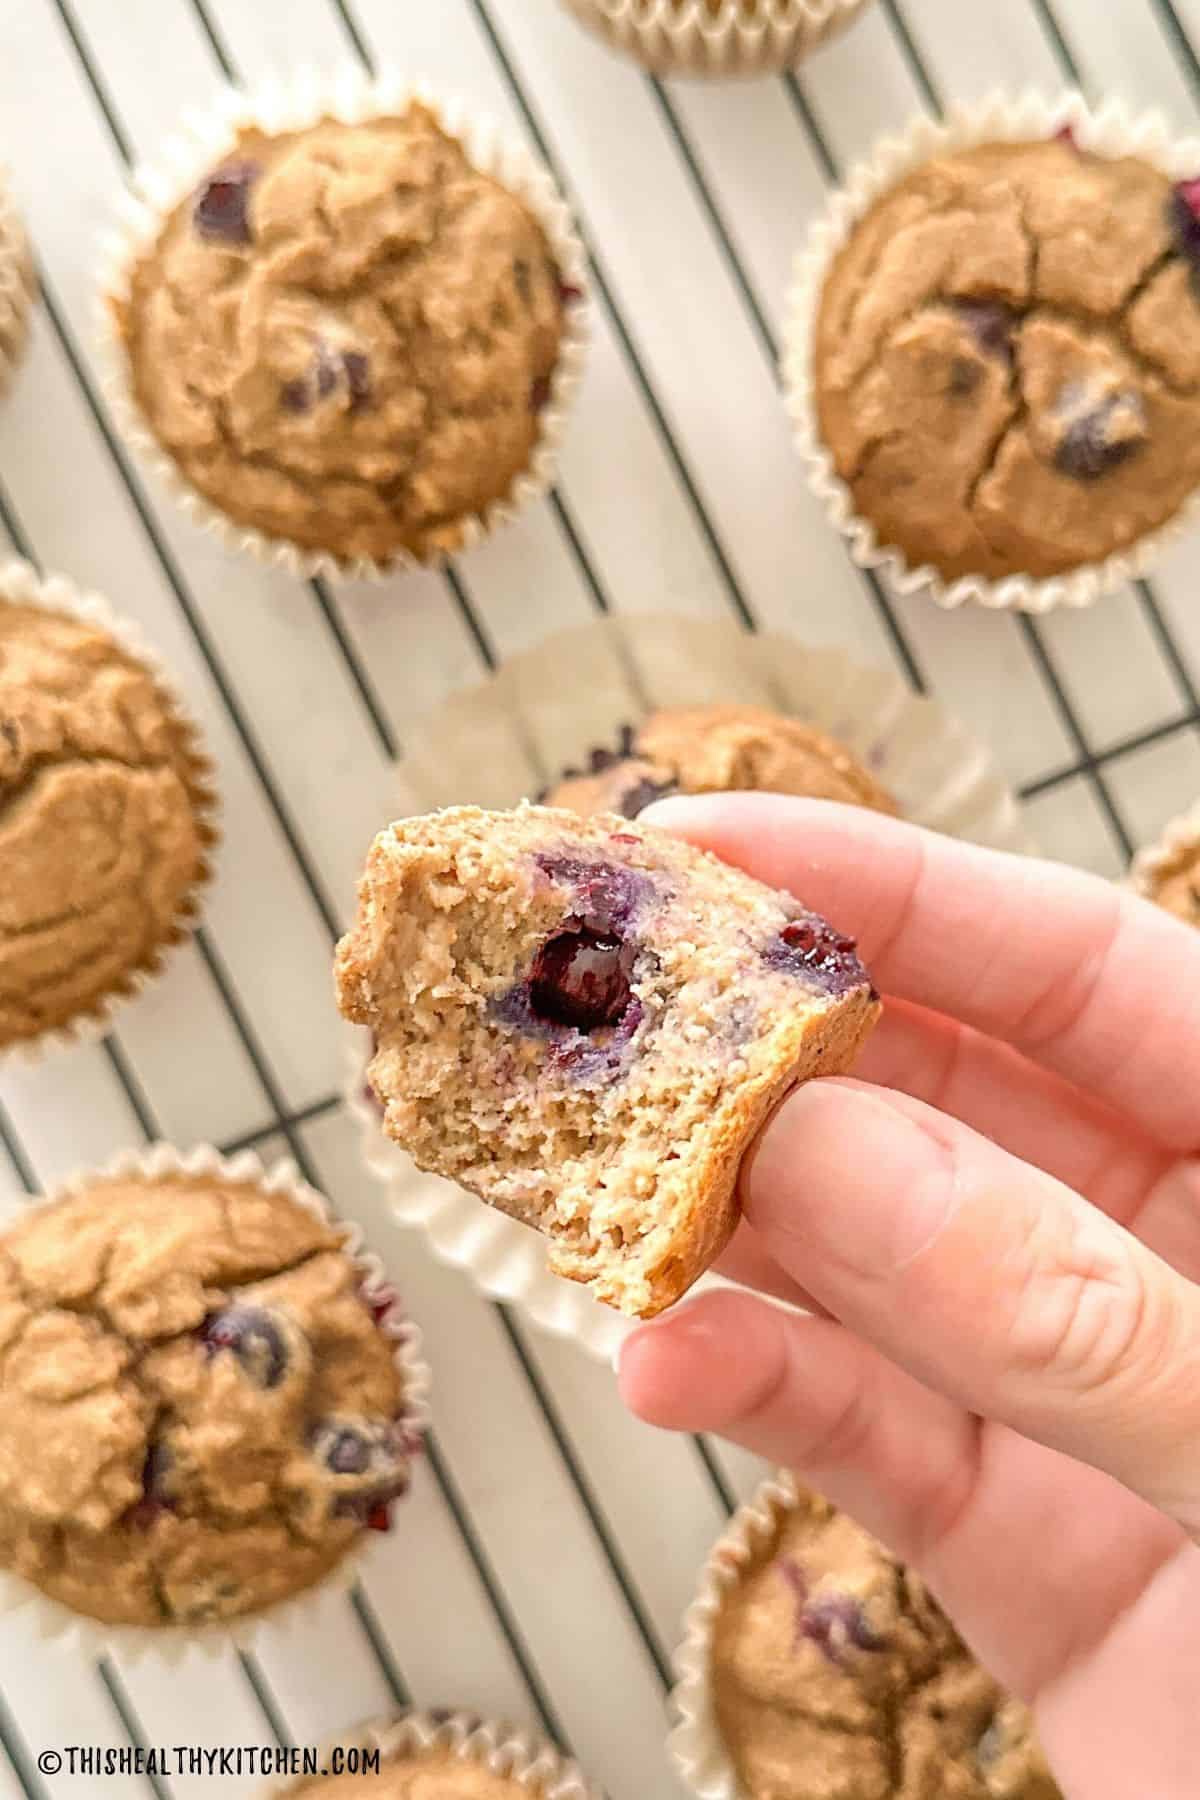 Hand holding up a bitten muffin to expose blueberries inside.